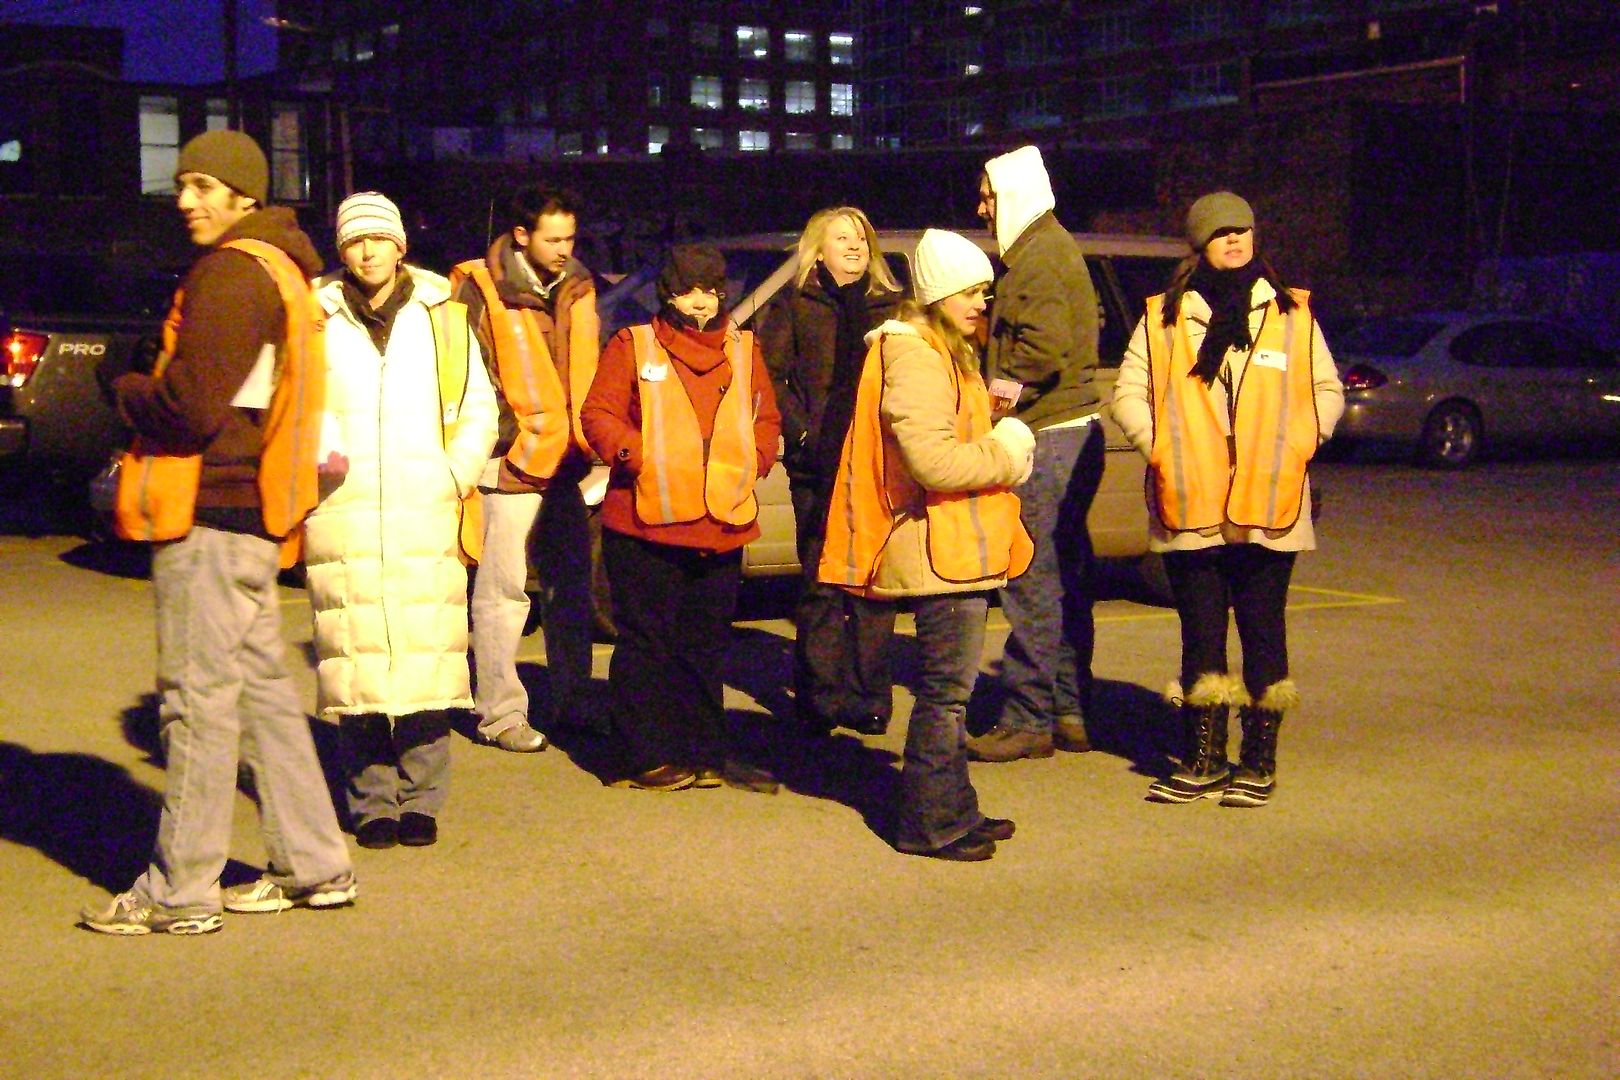 Antis standing outside a clinic wearing orange vests that make them look just look pro-choice clinic escorts